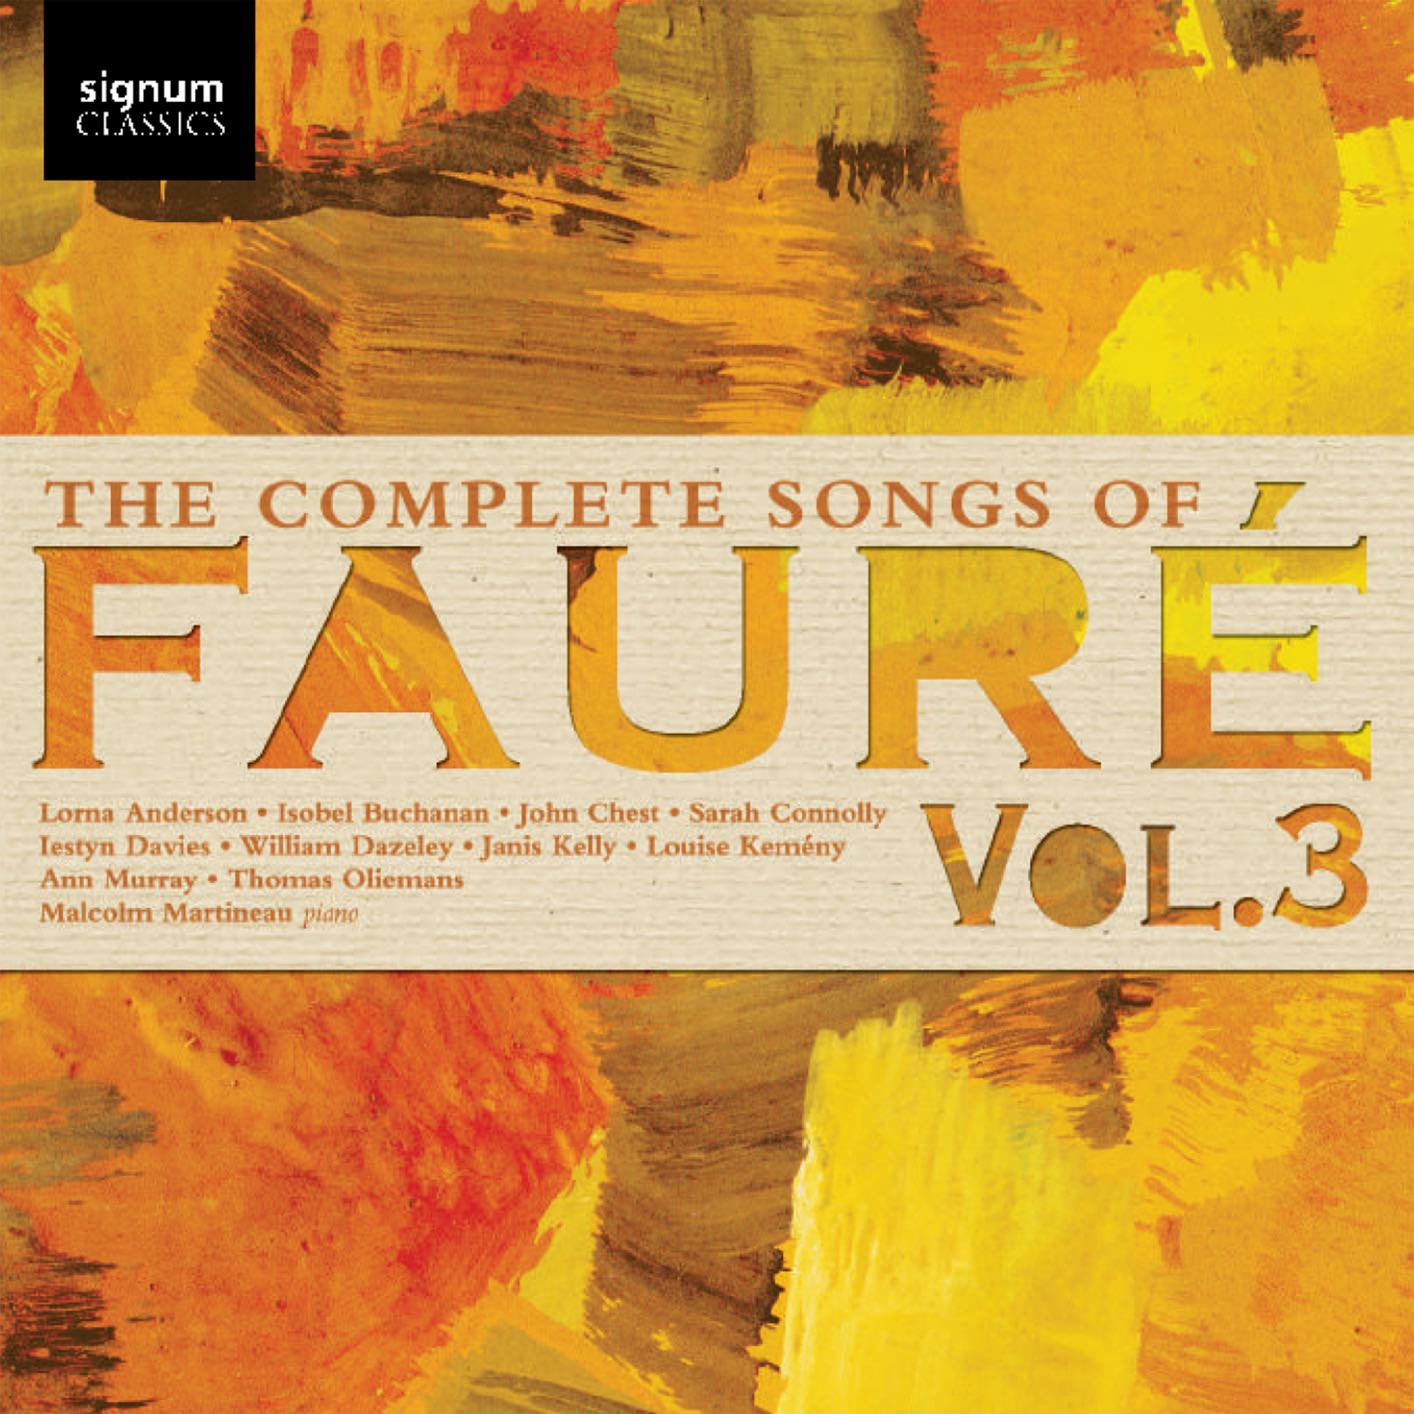 Malcolm Martineau - The Complete Songs of Faure, Vol. 3 (2018) [FLAC 24bit/96kHz]